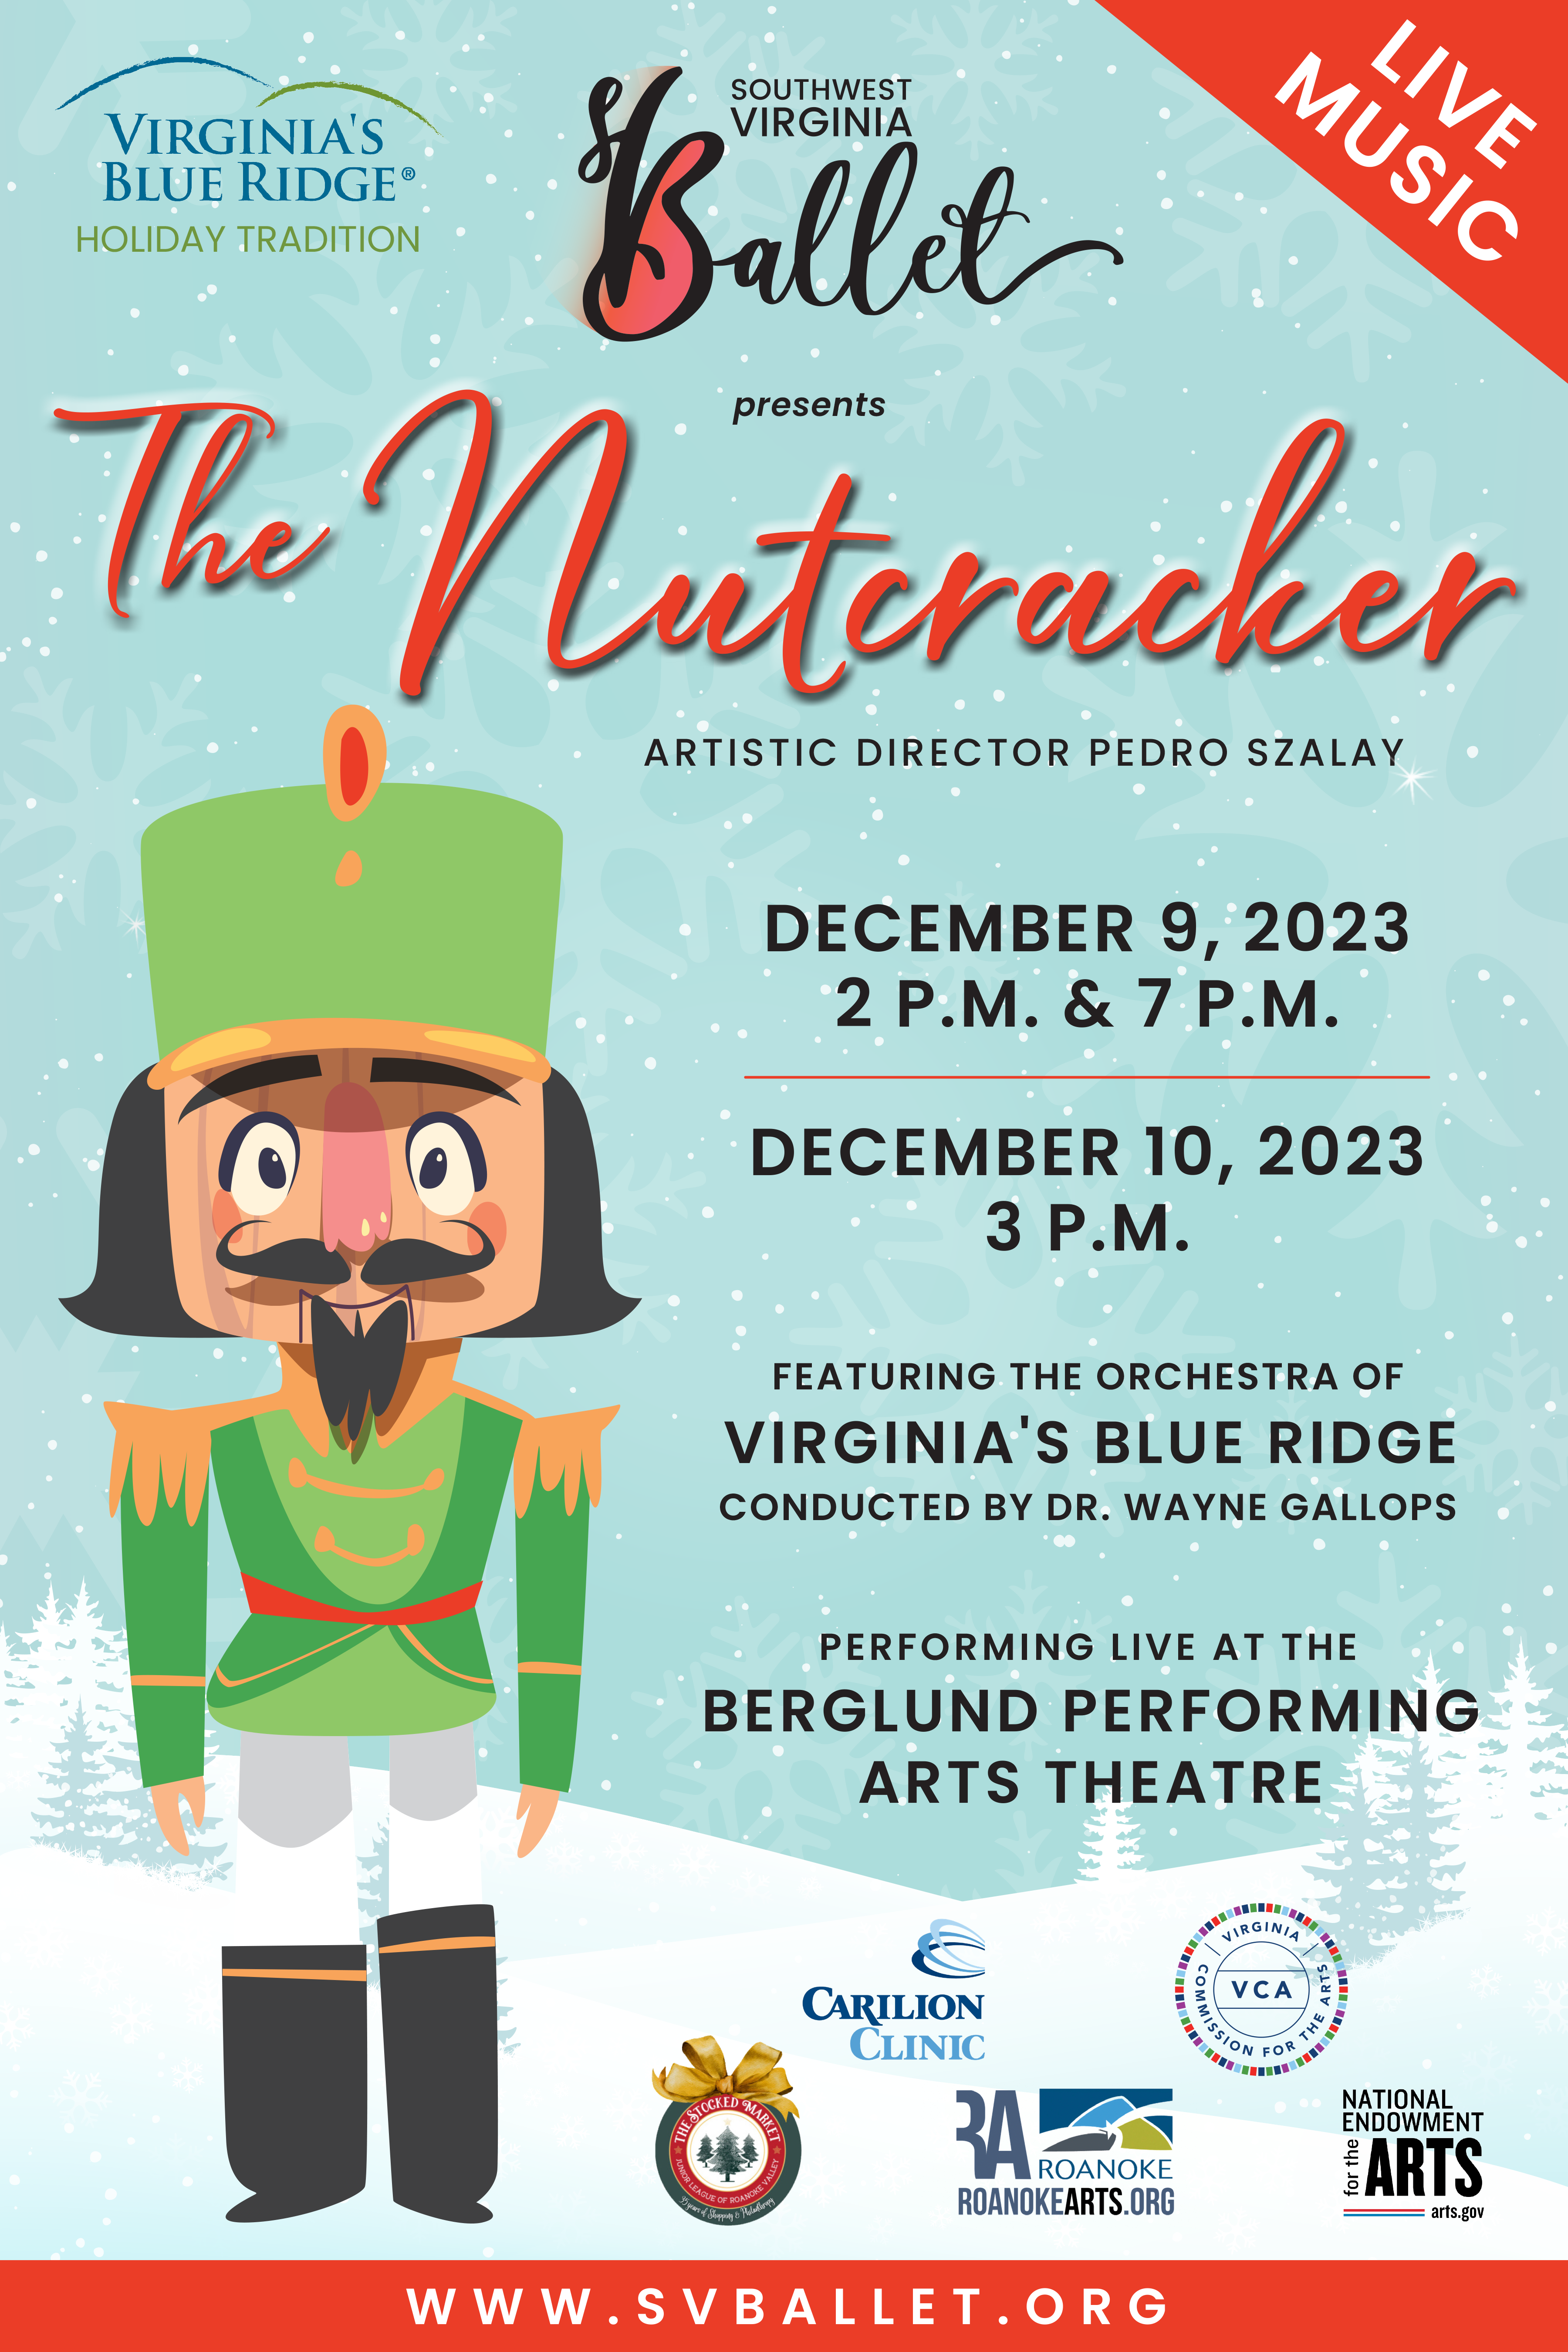 Nutcracker Poster with a cartoon soldier and details about the production